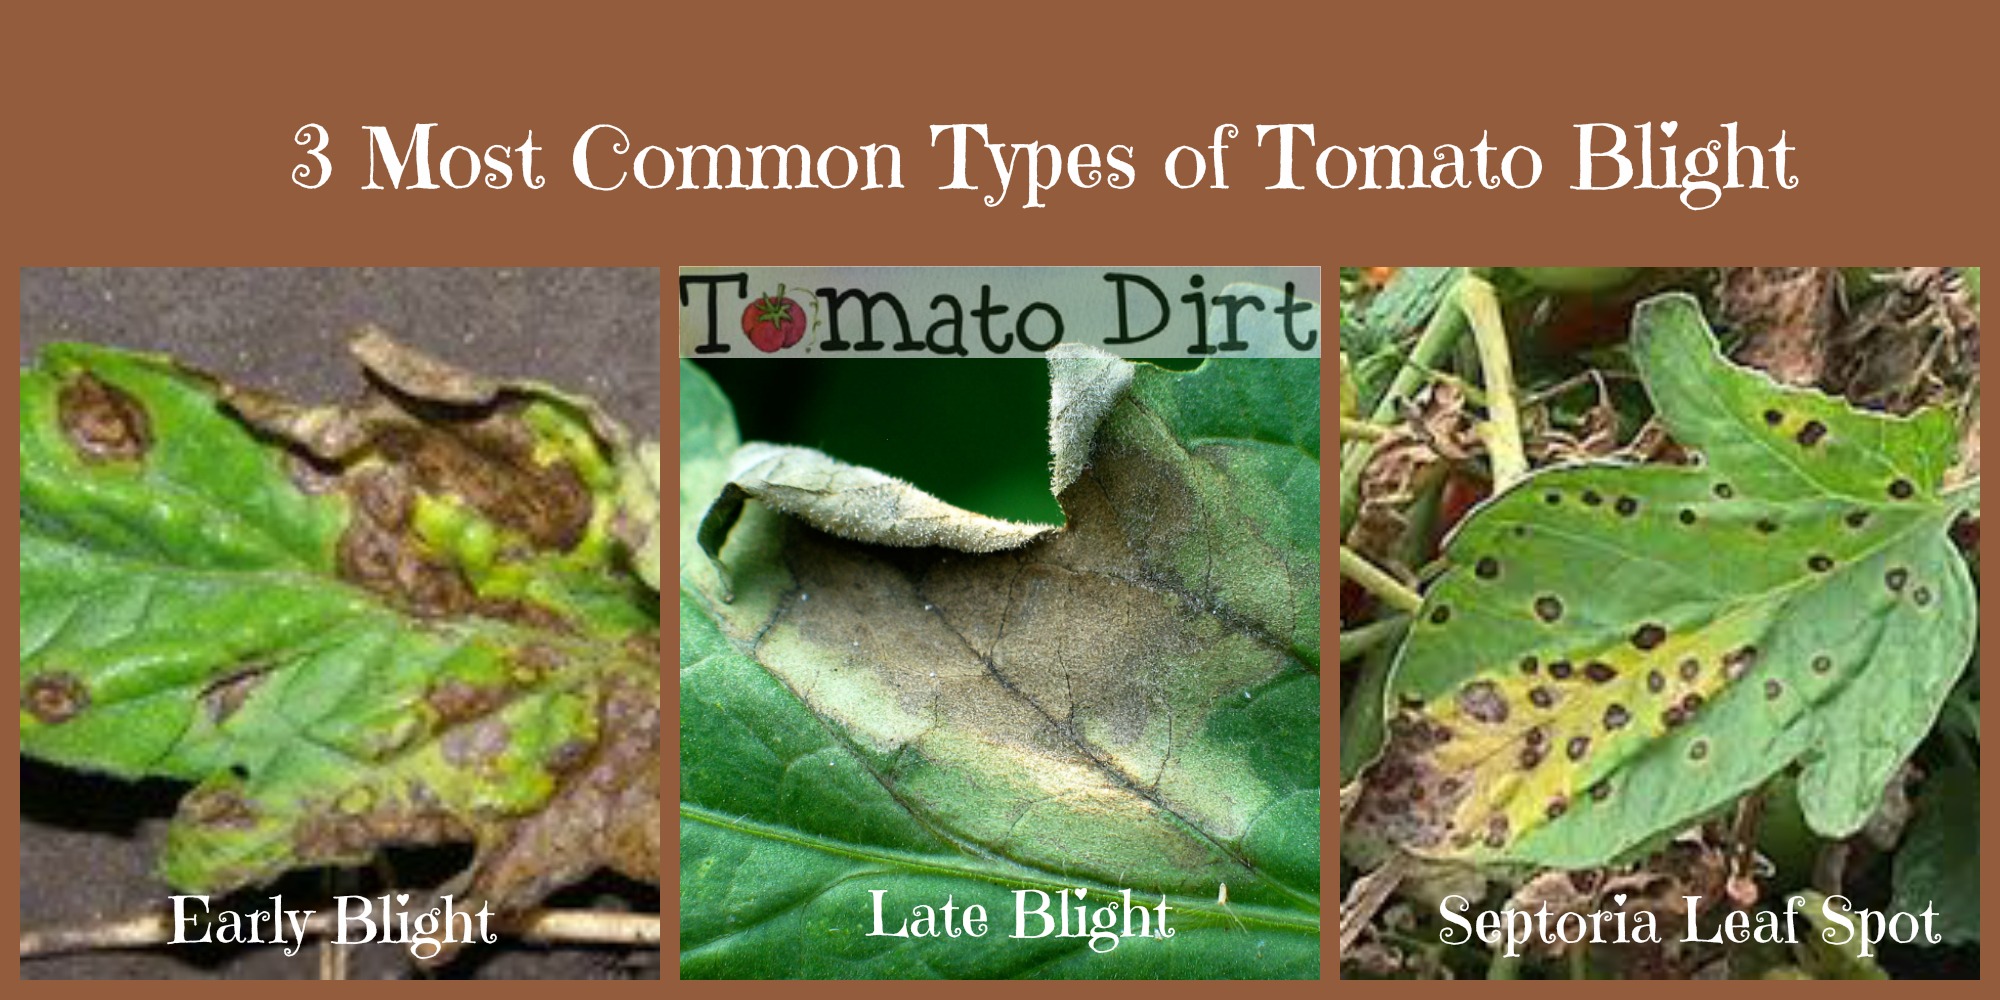 3 most common types of tomato blight with Tomato Dirt